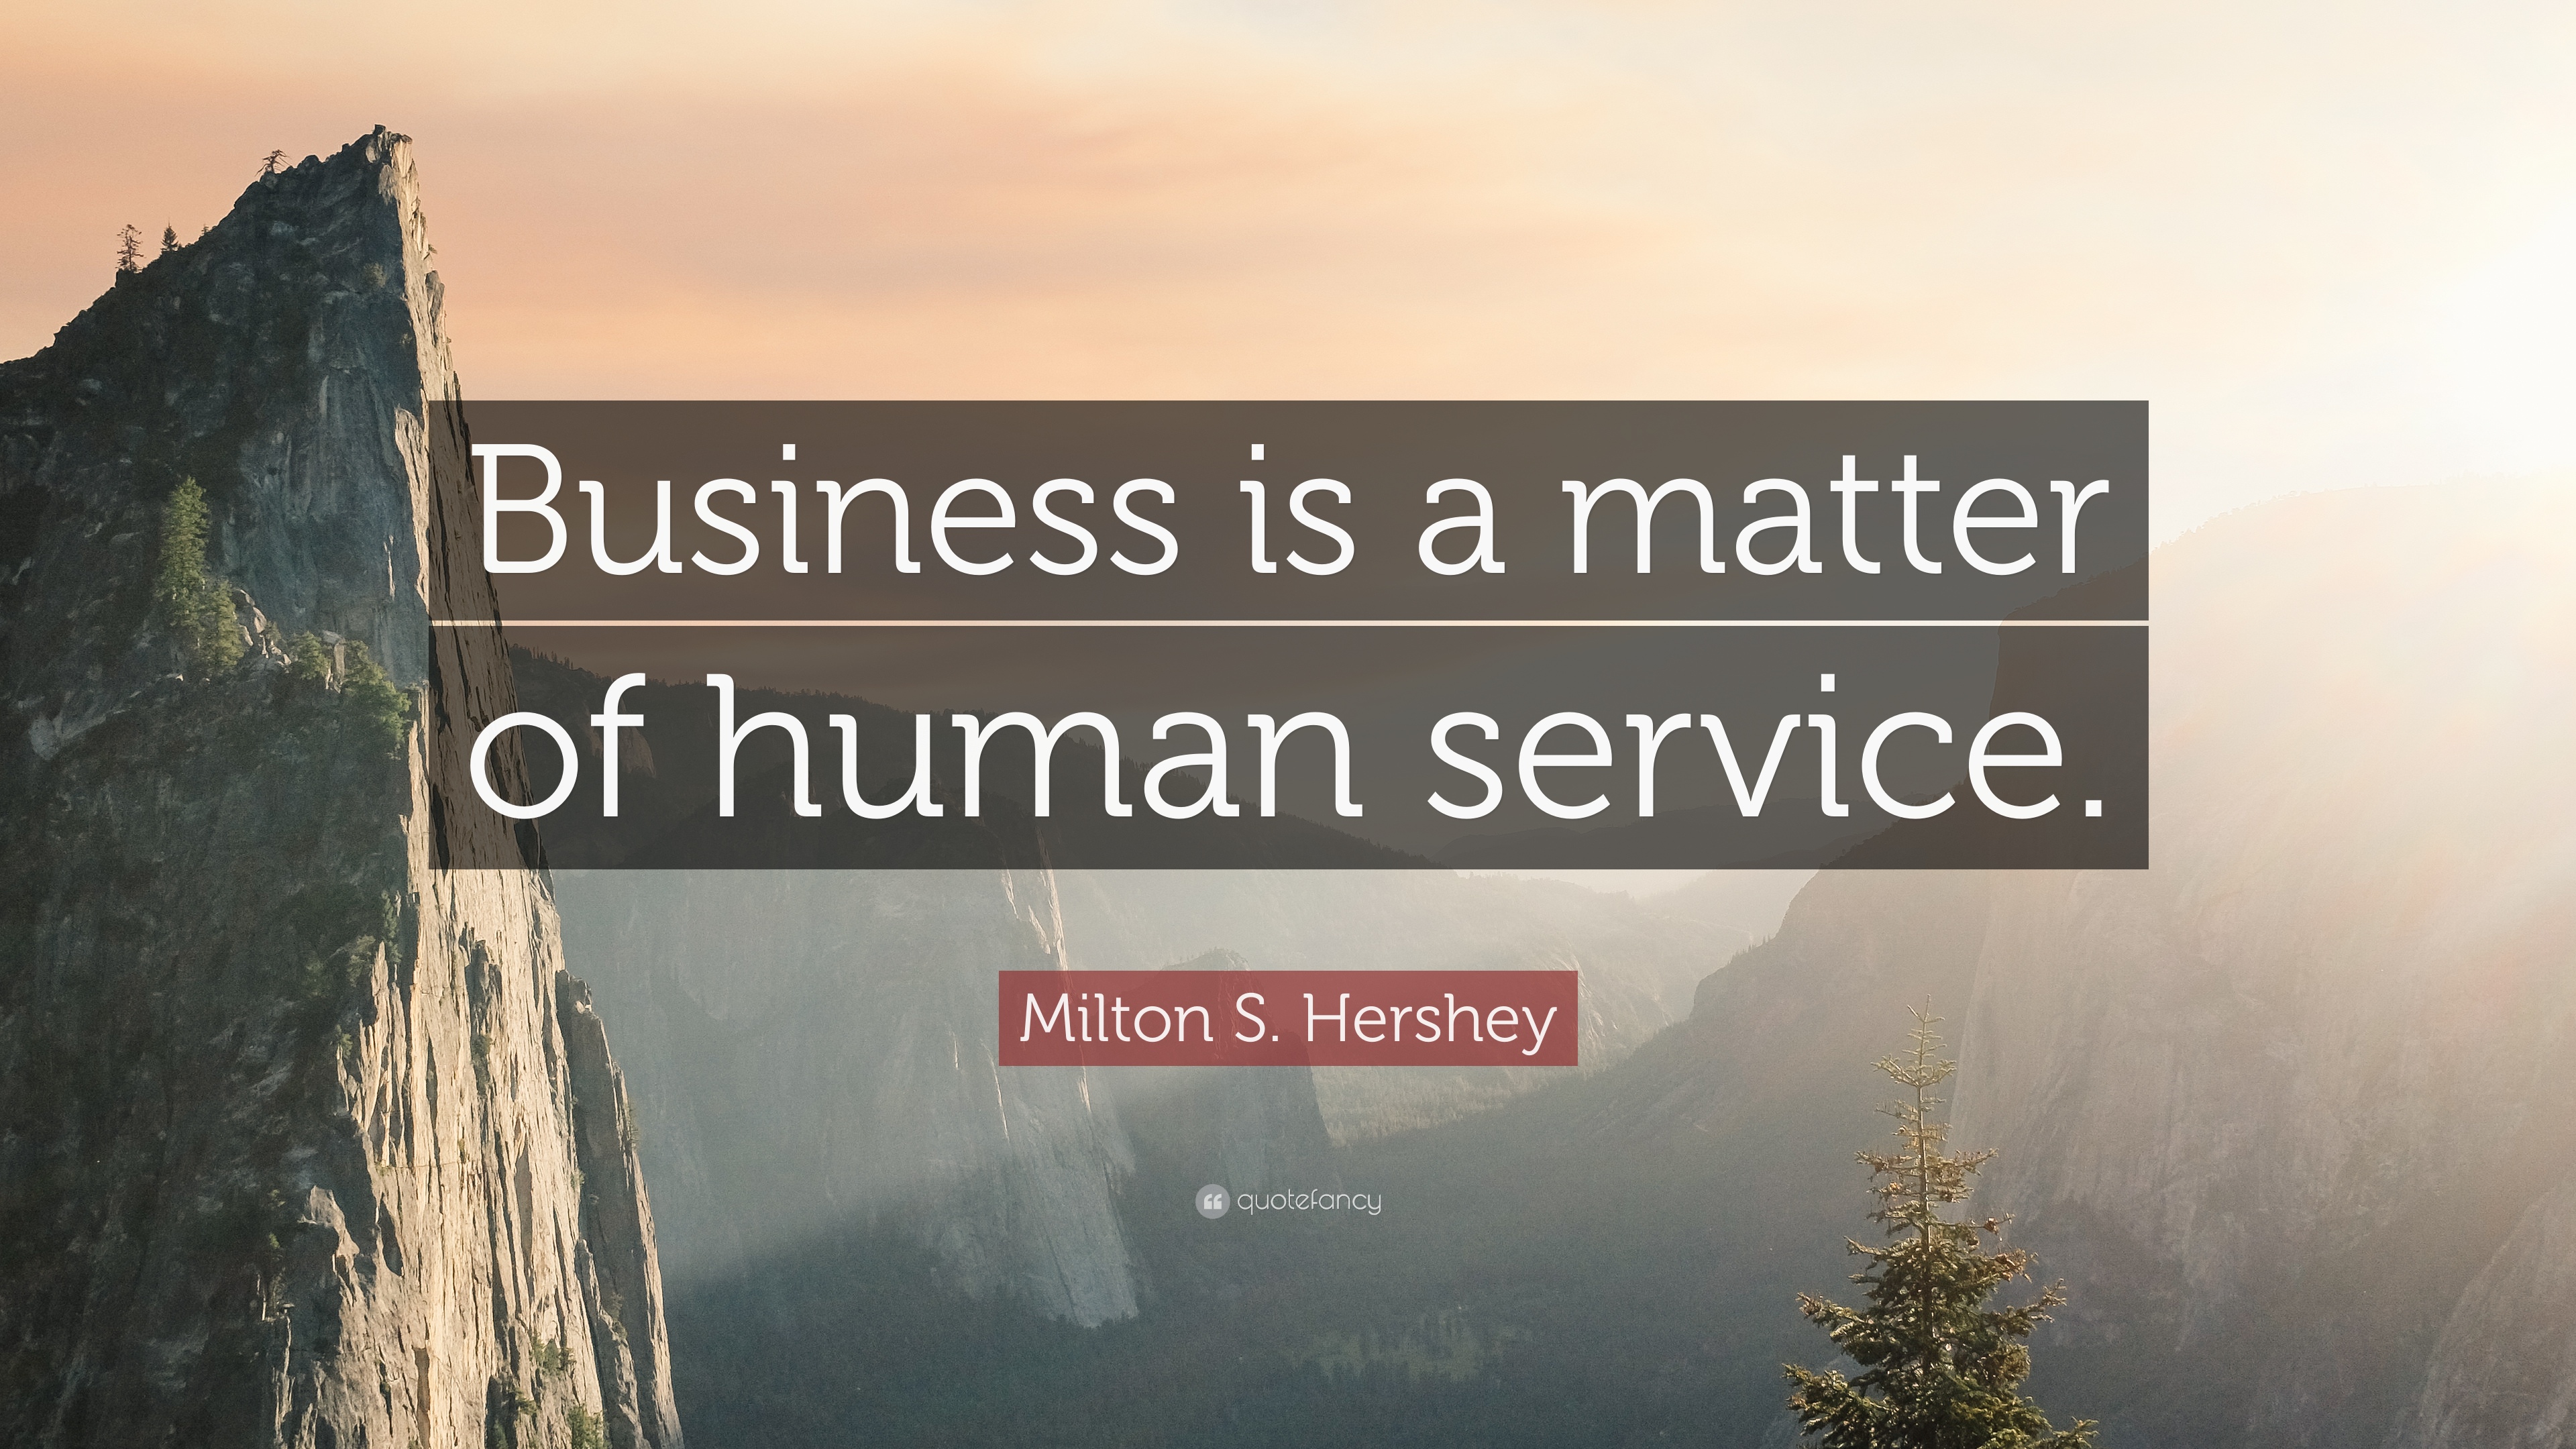 Milton S. Hershey Quote: “Business is a matter of human service.”